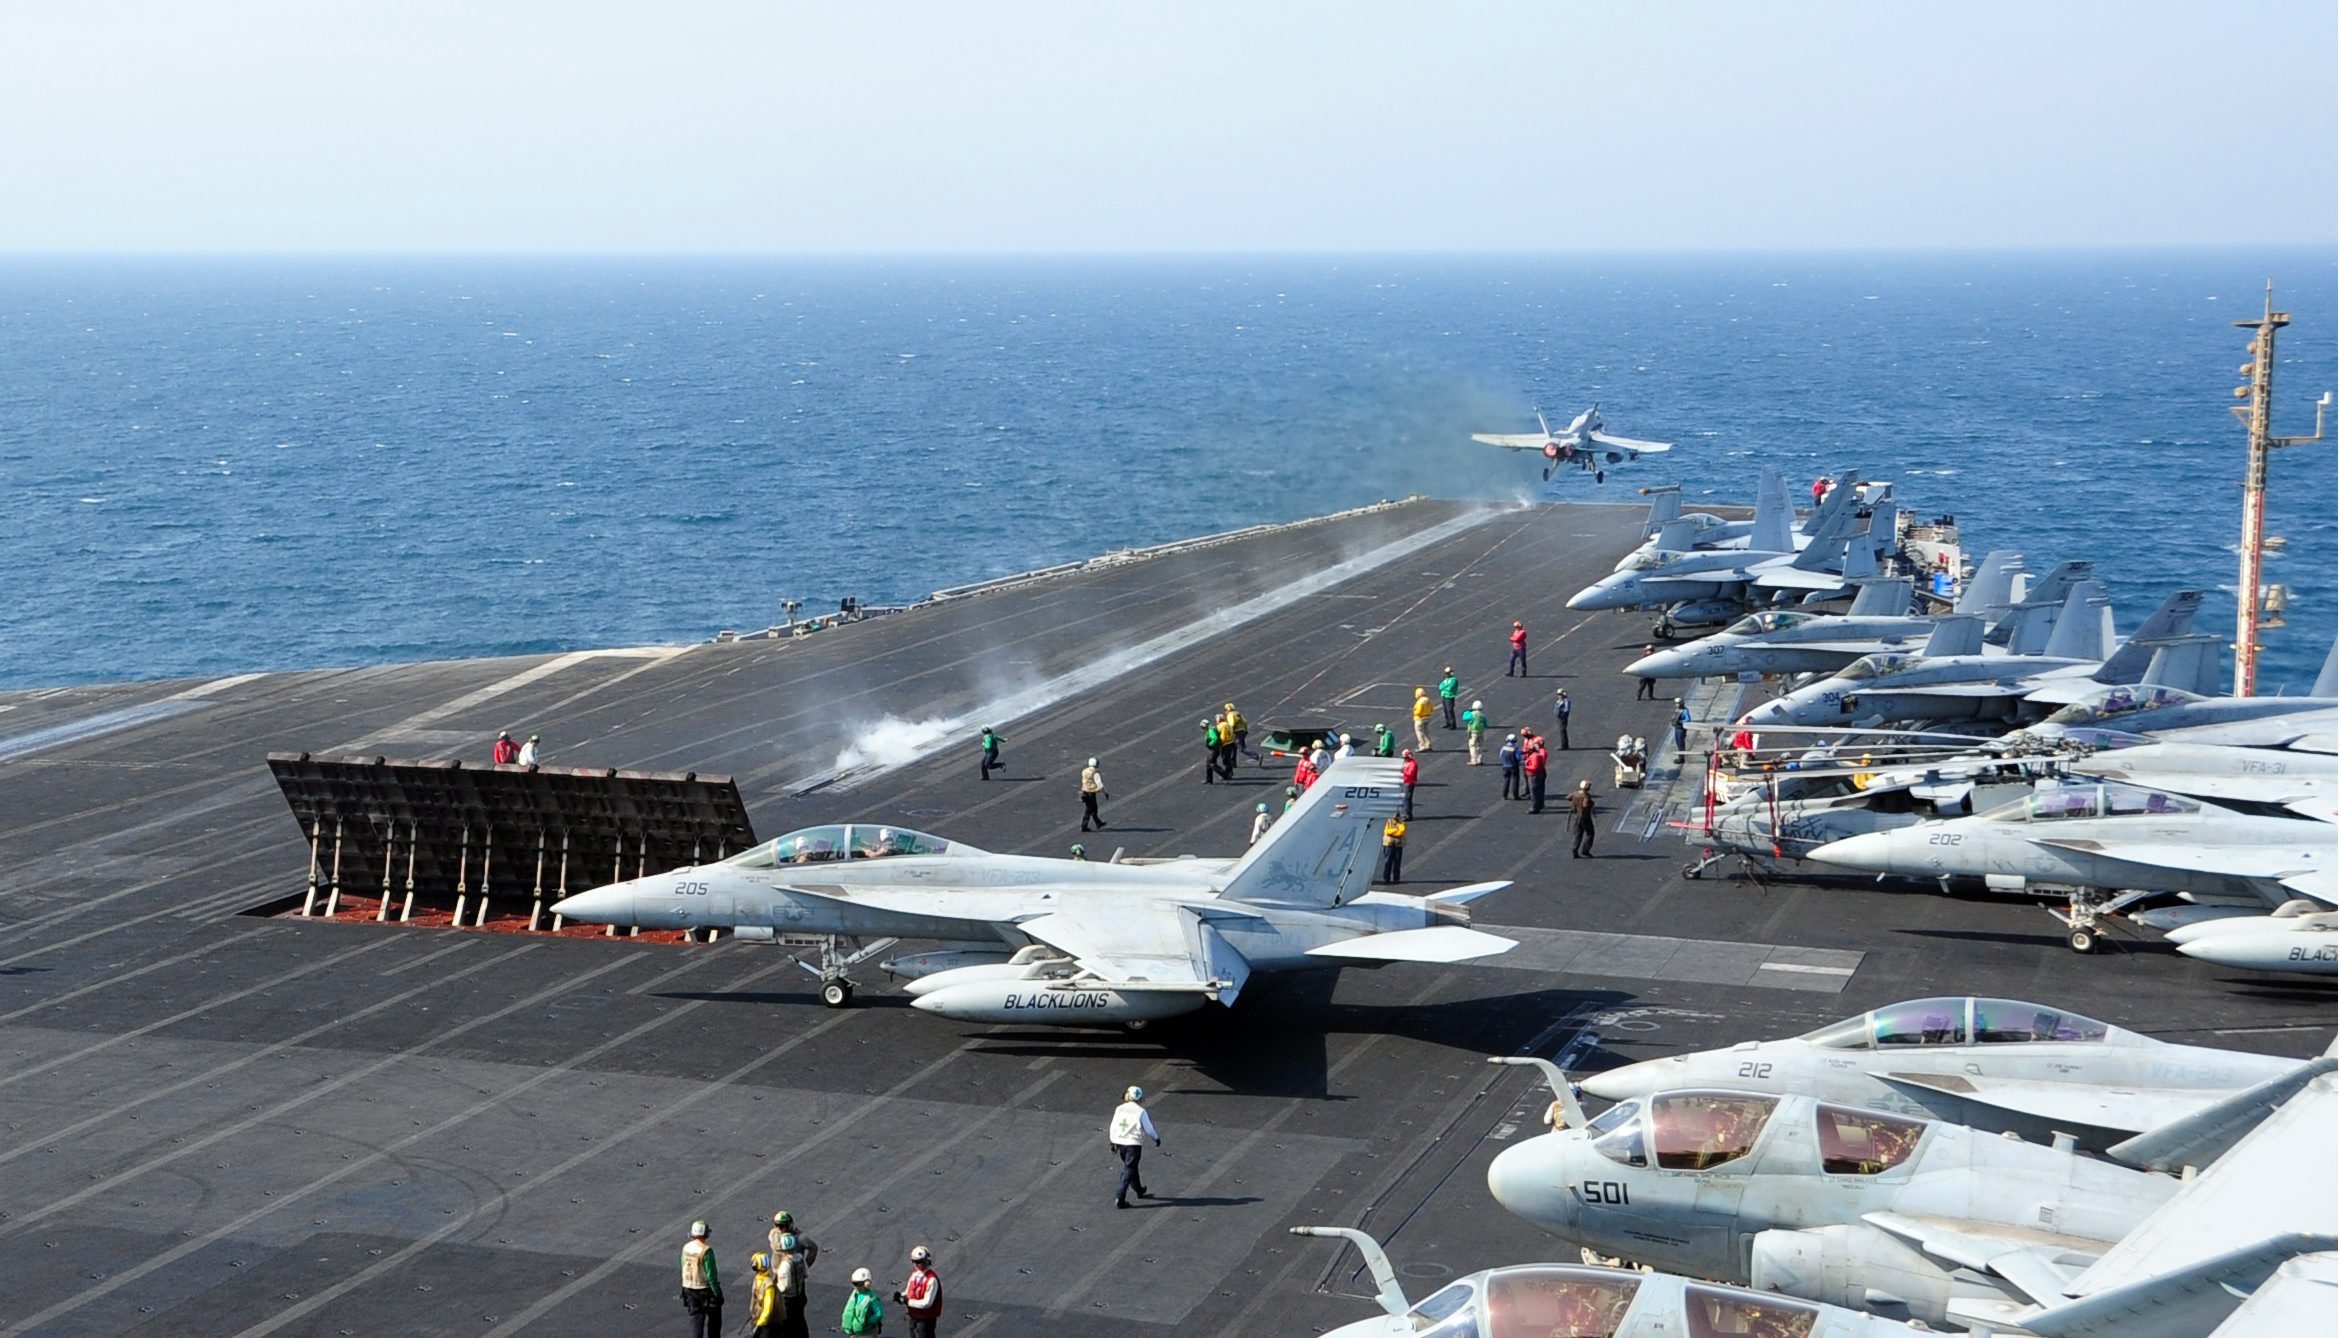 US Department of Defense (DOD) shows an aircraft launching from the flight deck of the aircraft carrier USS George H.W. Bush in the Arabian Gulf on Oct. 13, 2014. (Joshua Card—EPA)